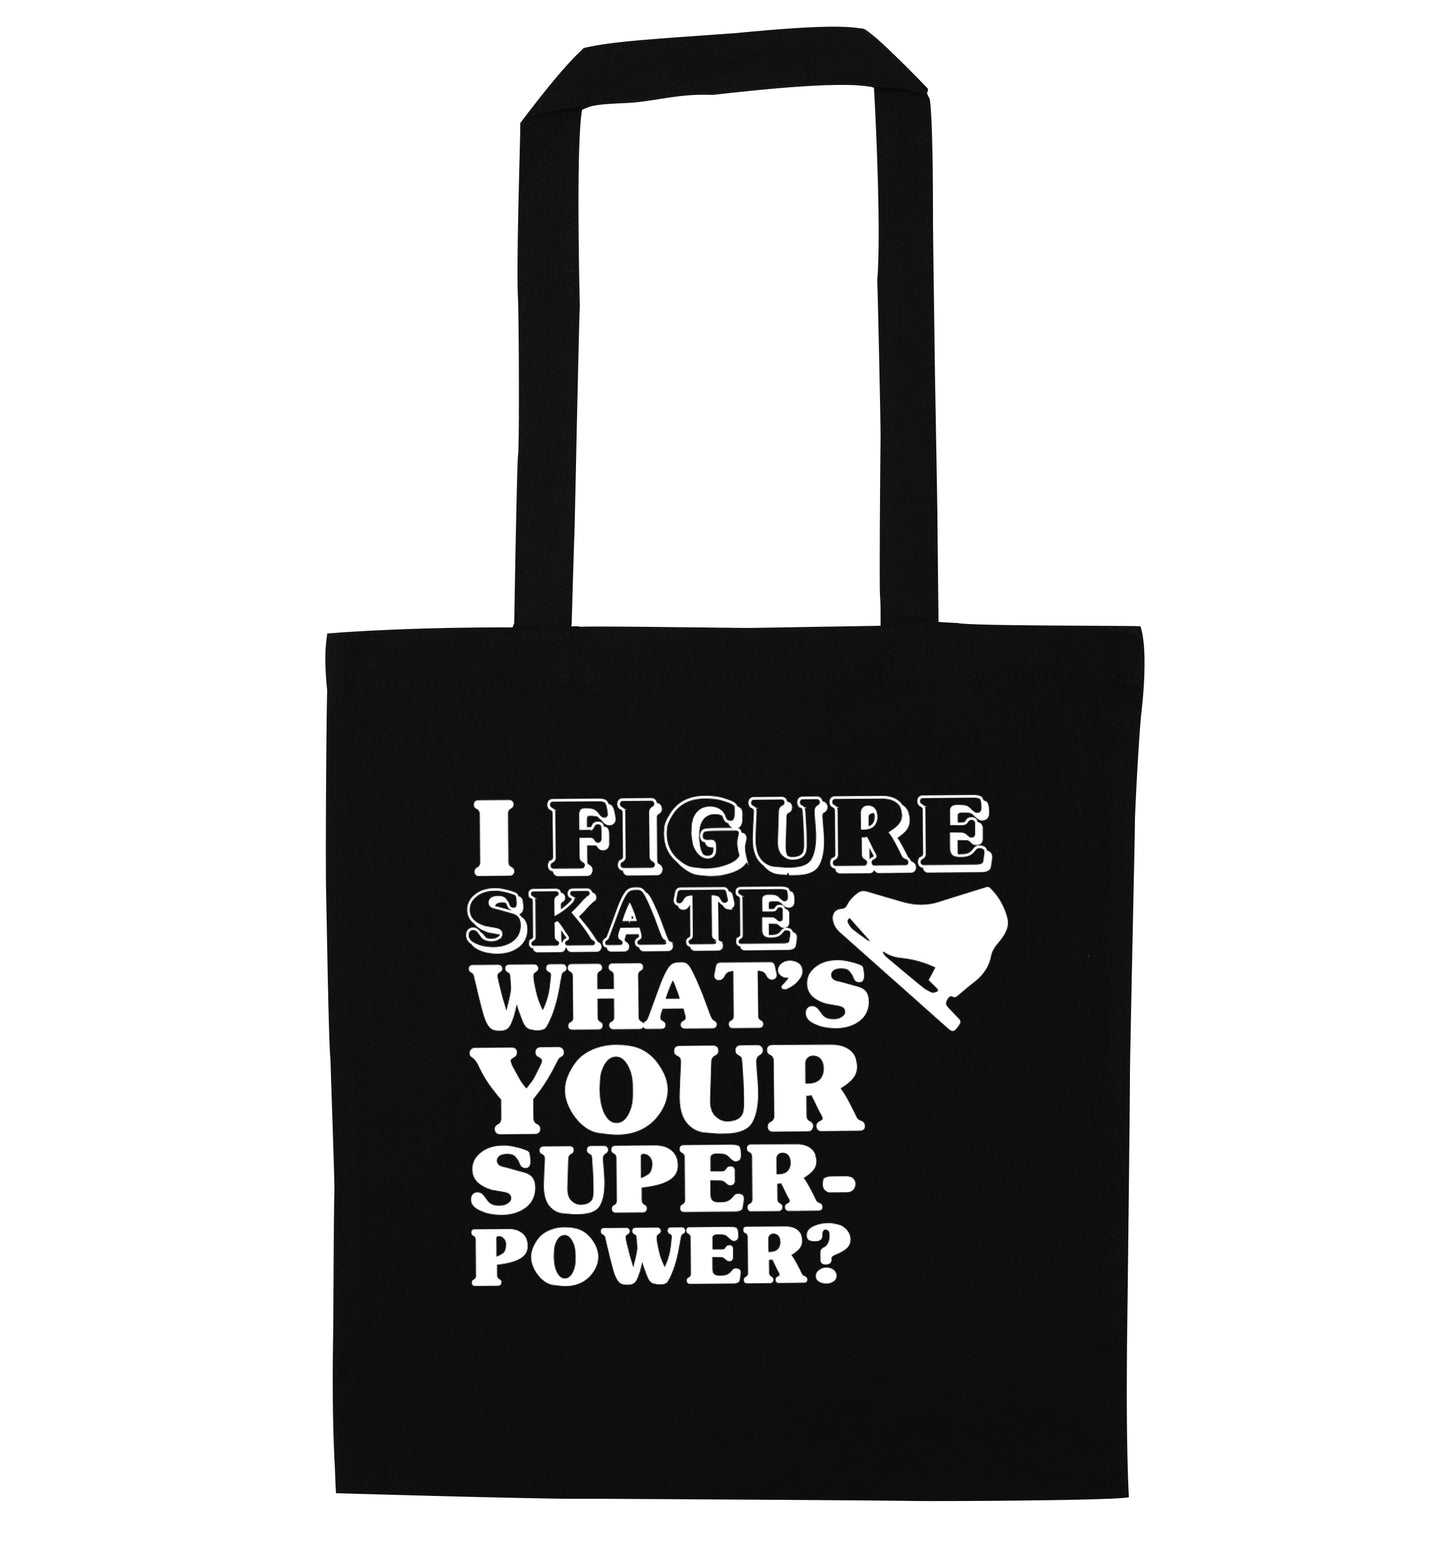 I figure skate what's your superpower? black tote bag